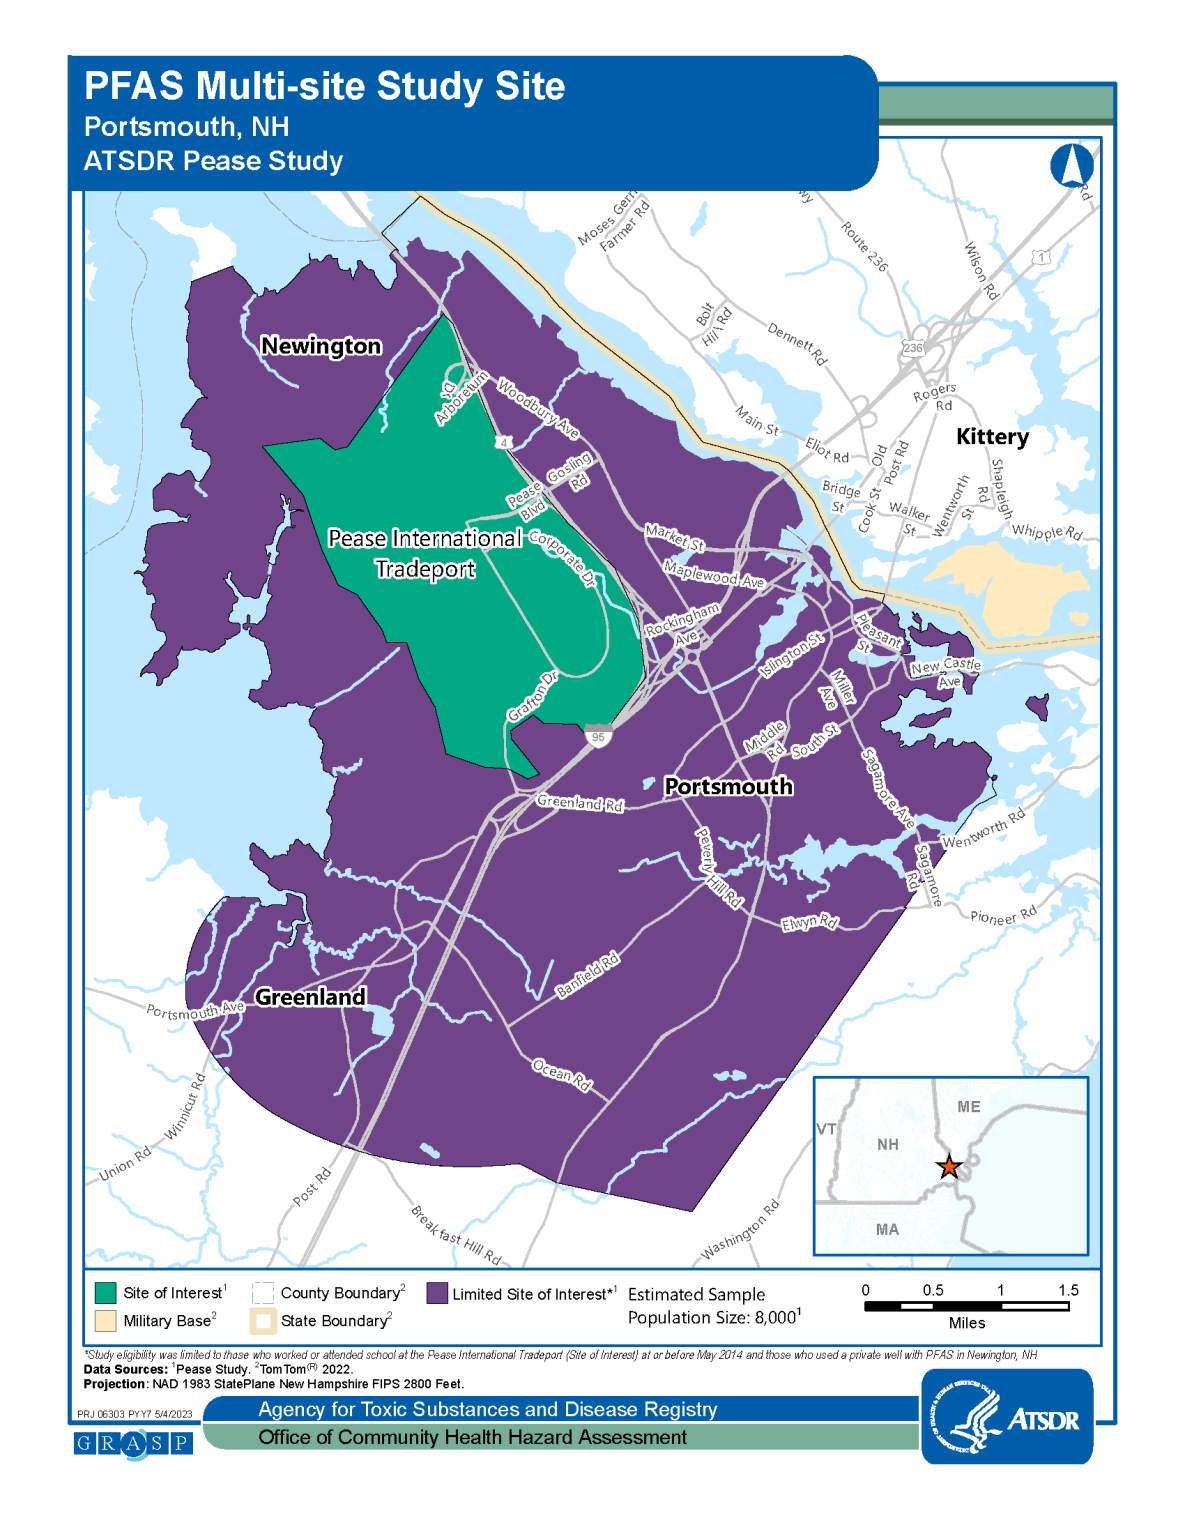 Map displays the eligible area for the Pease Study, which is looking at exposures near Portsmouth, NH.